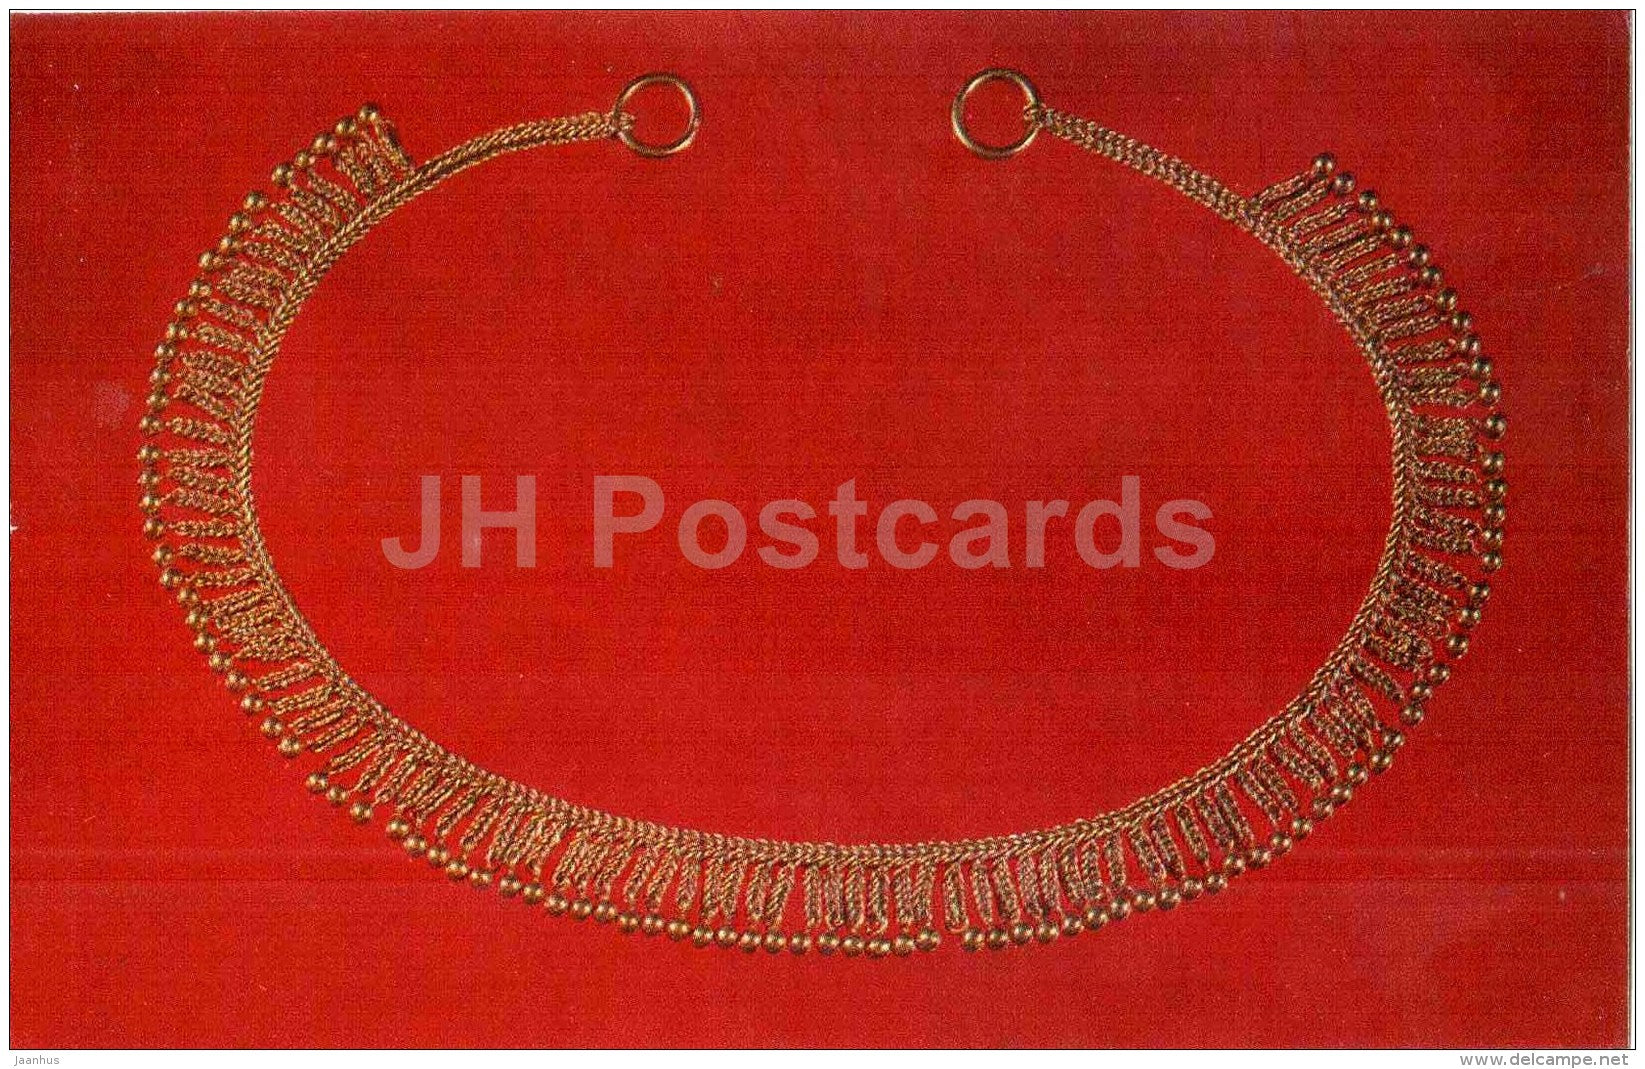 Necklace with a hundred pendants , 11th century - Jewellery - Armenian History Museum - 1978 - Russia USSR - unused - JH Postcards